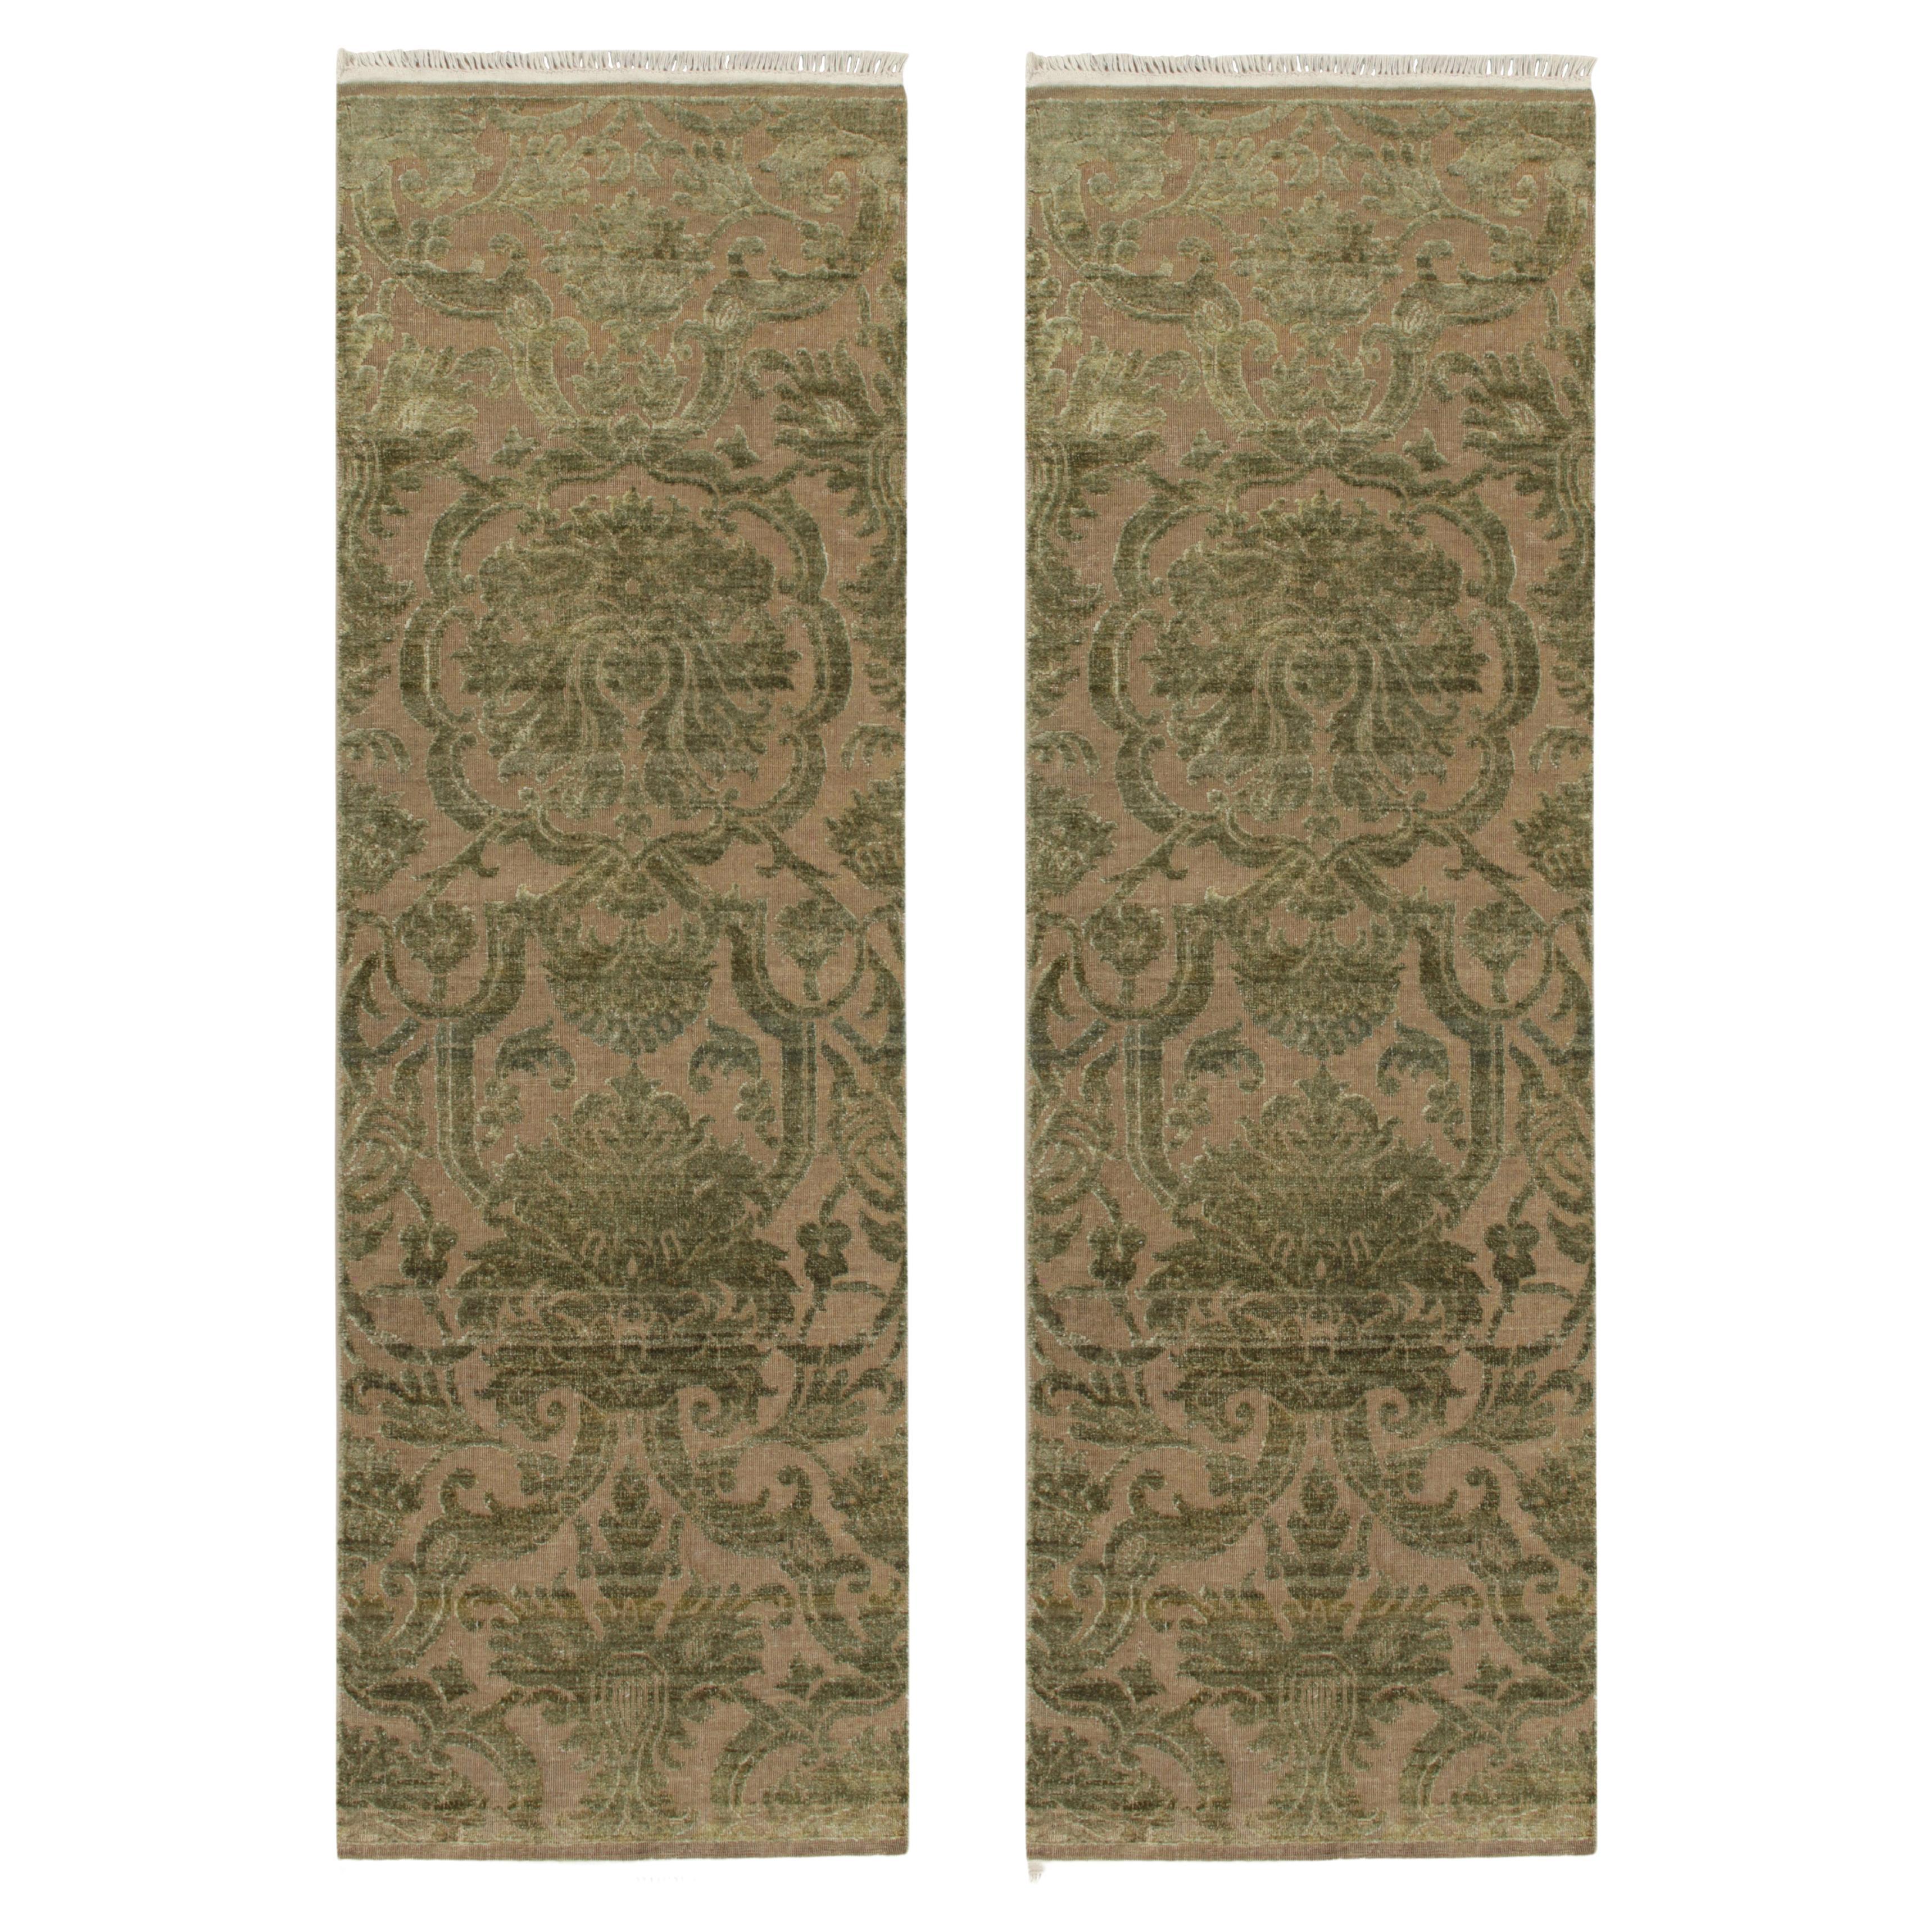 Rug & Kilim’s European Style Twin Runners in Beige with Green Floral Patterns